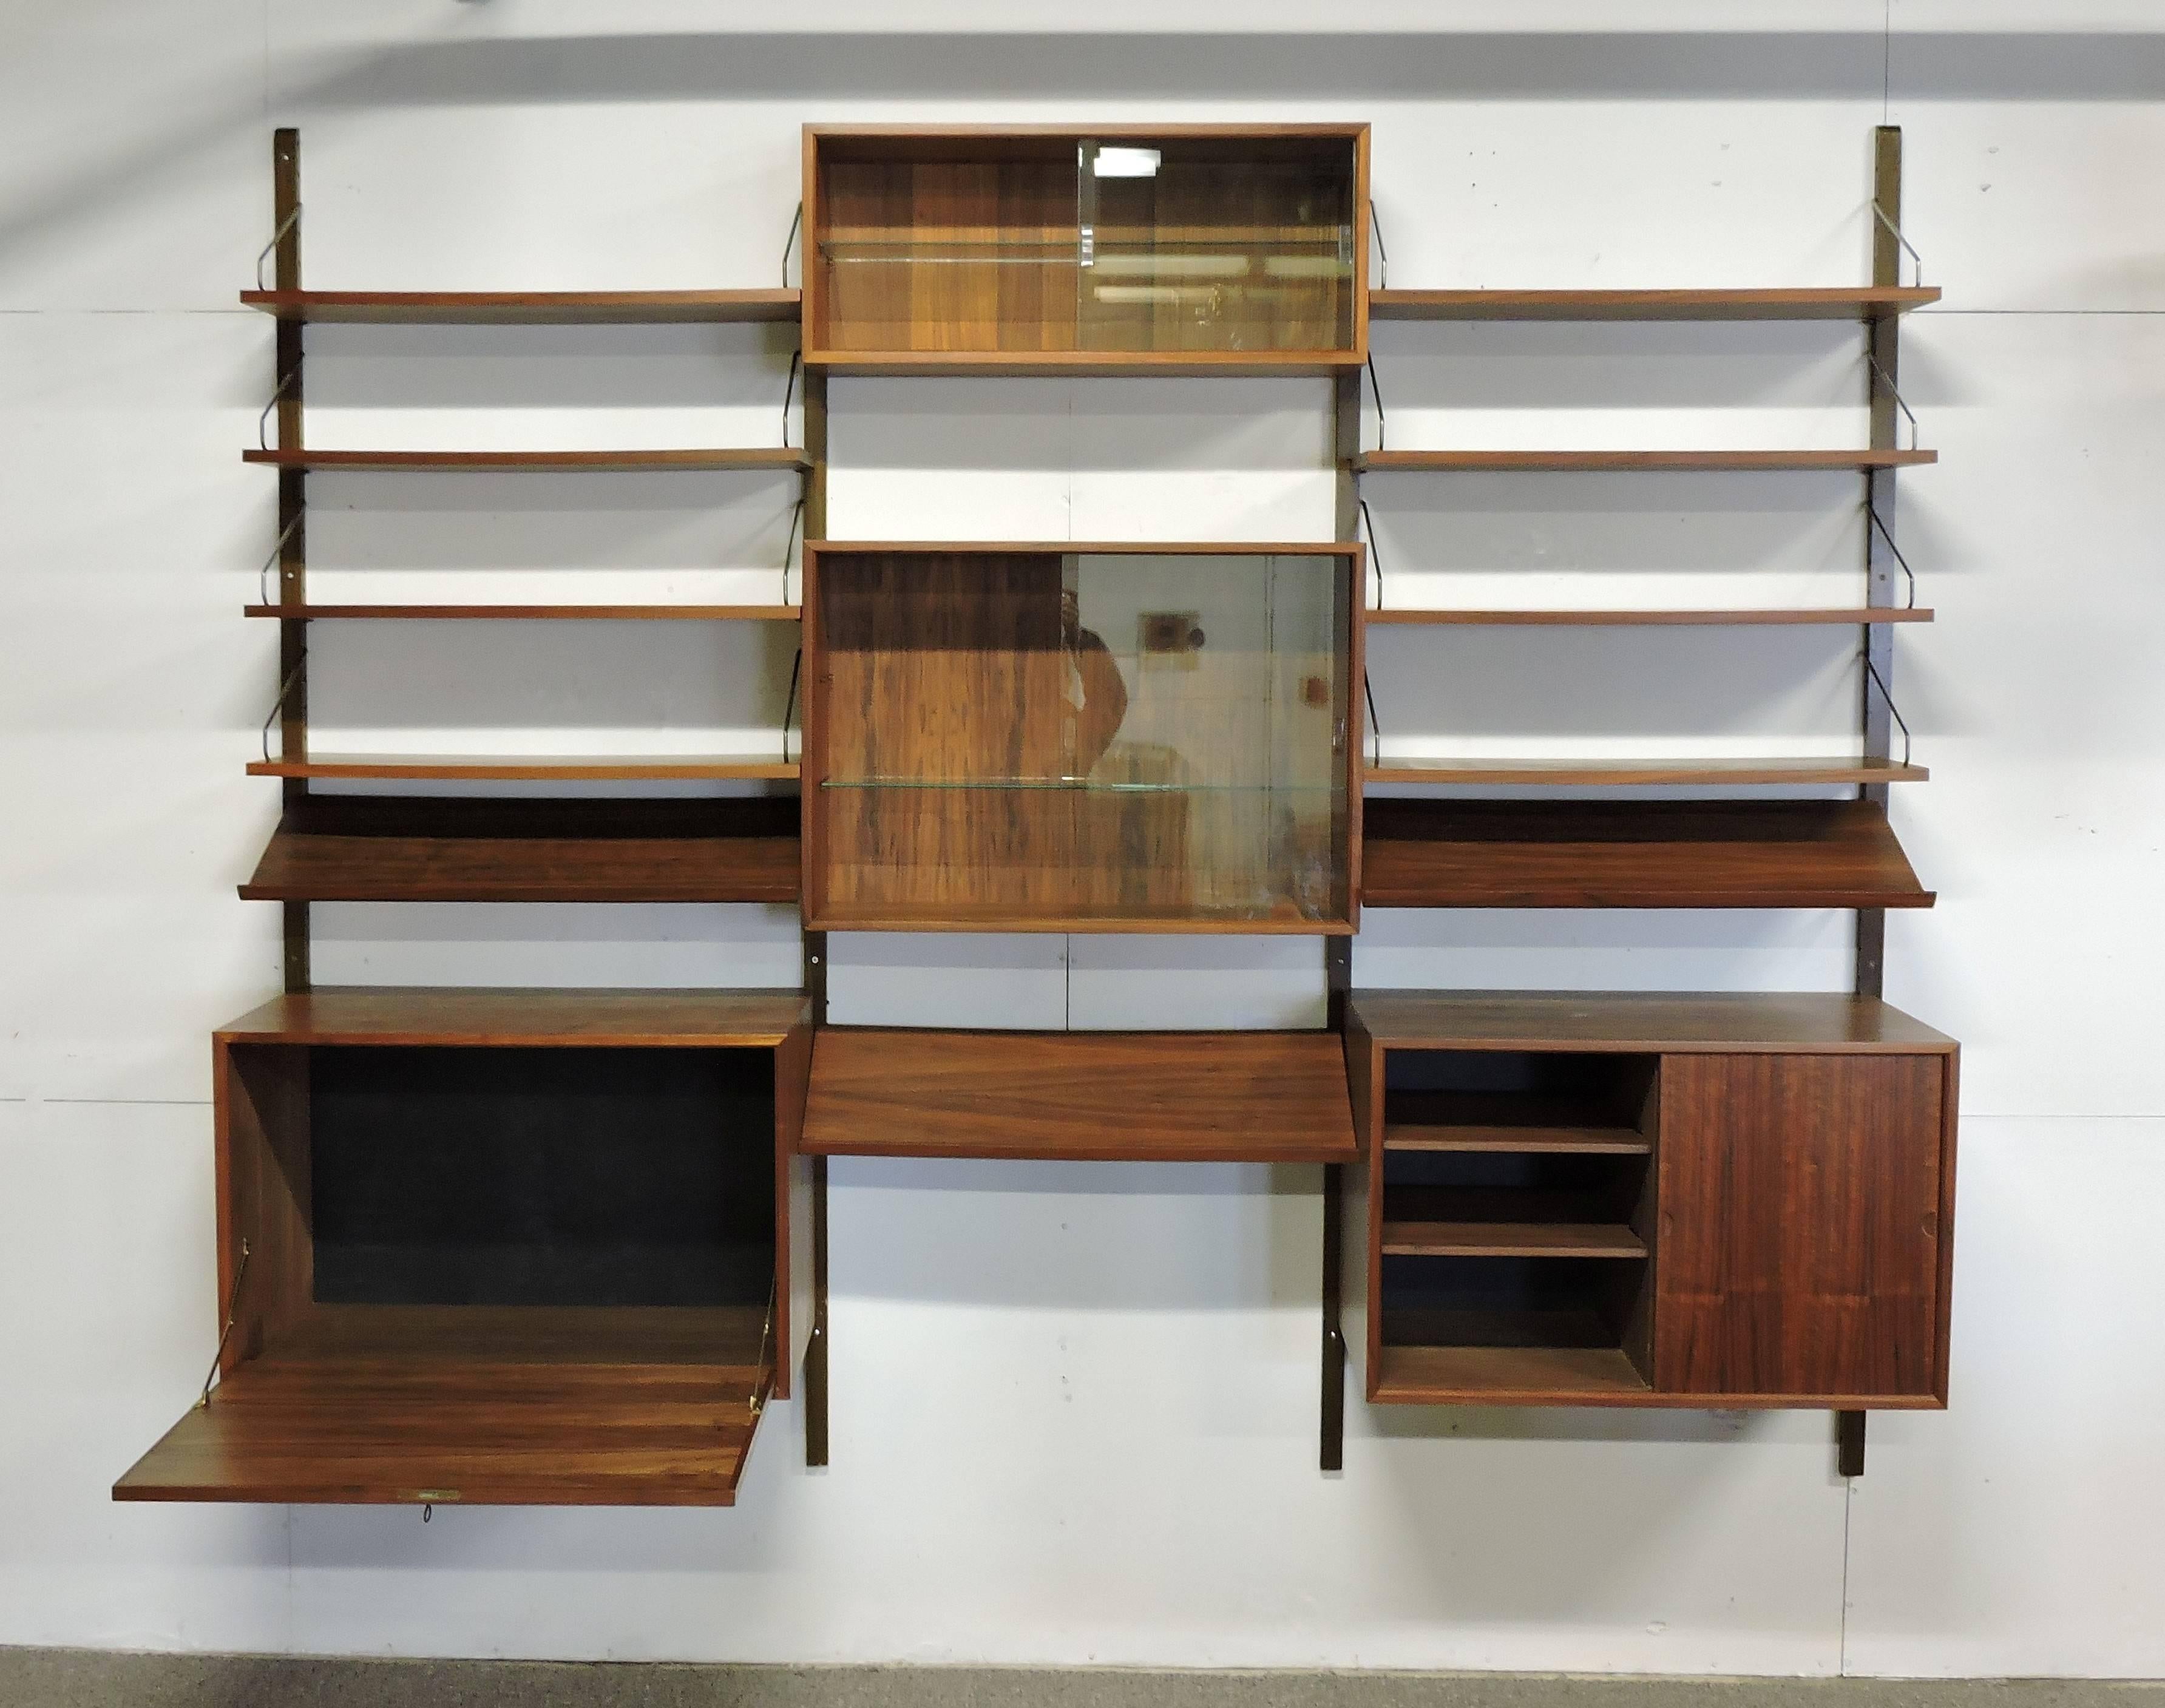 Large three bay Royal system wall unit designed by Poul Cadovius and made in Denmark. This unit includes four poles, four modules, eight shelves and three hard-to-find magazine shelves. Two of the cabinets have sliding glass doors, each with a